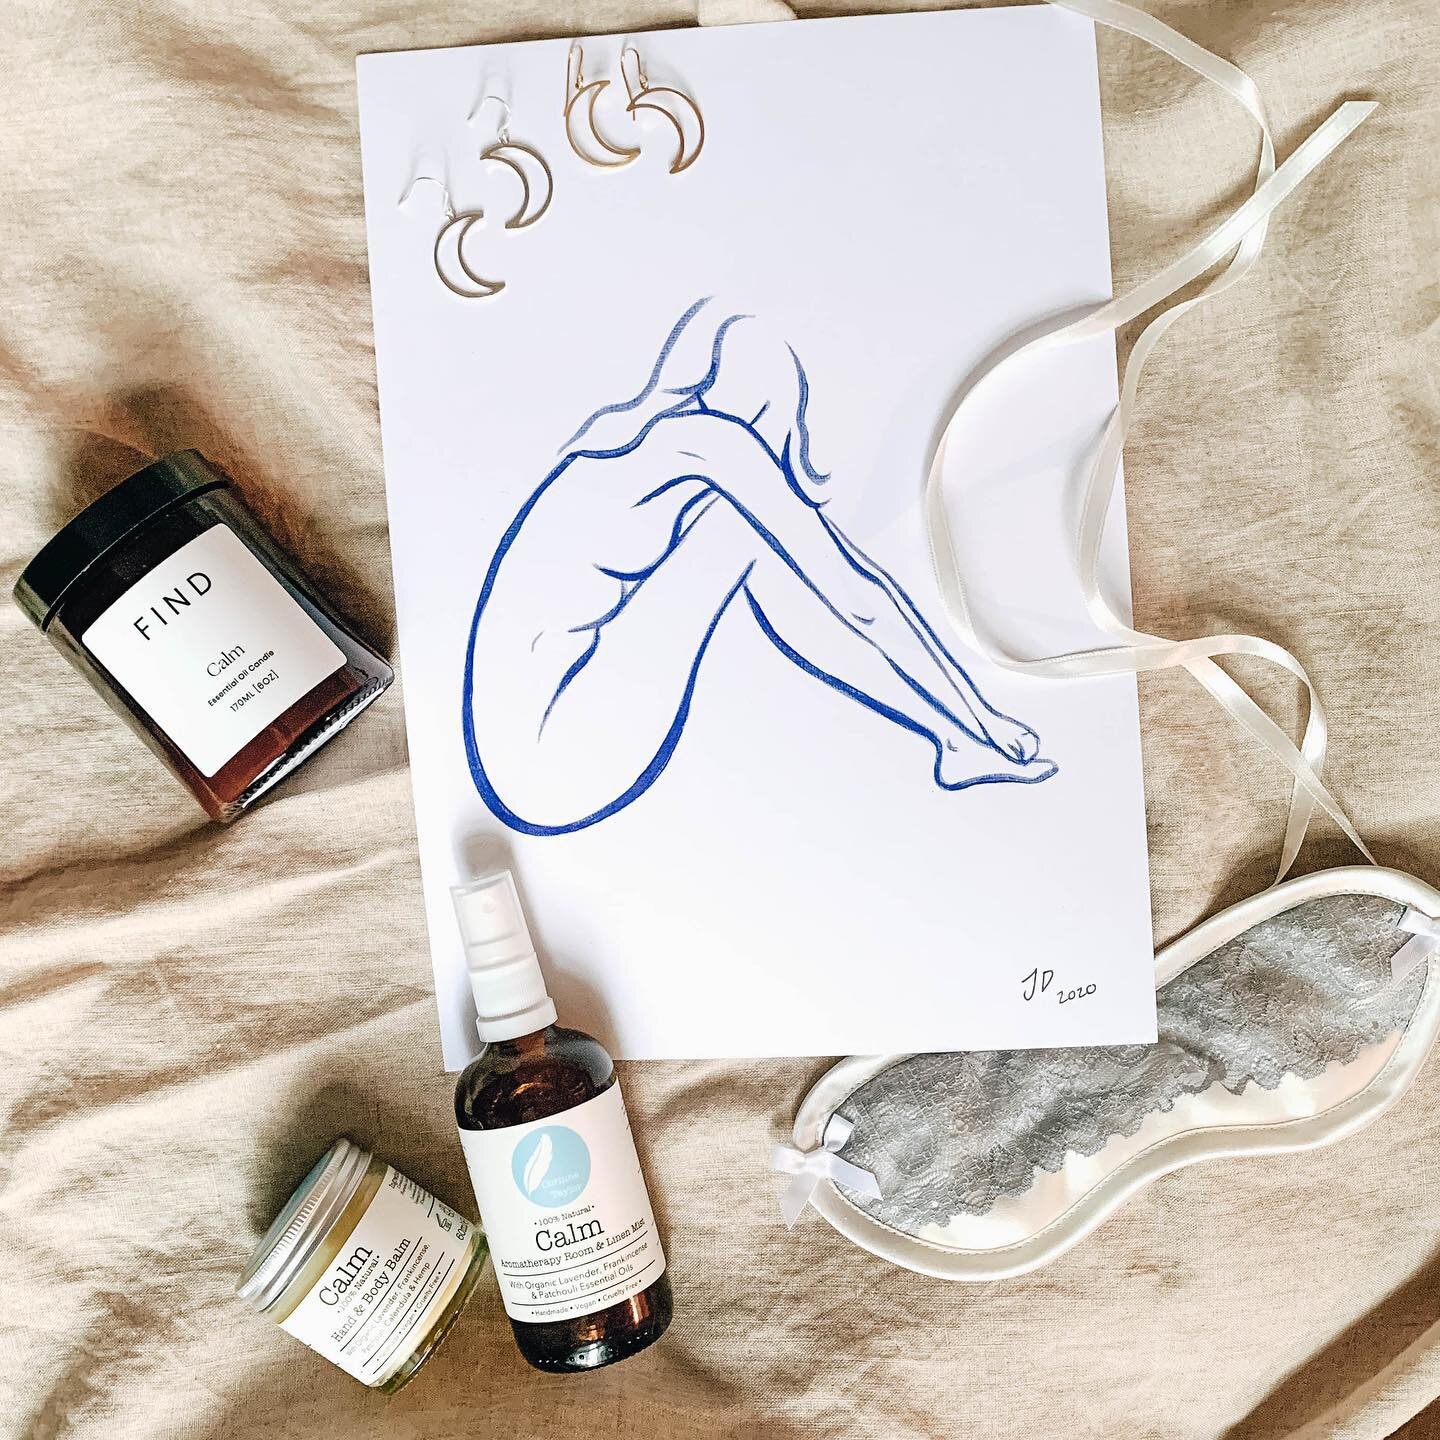 ✨Find your inner calm ~ August giveaway✨

With the world picking up its pace again and the skies turning a little grey, it&rsquo;s never been more important to take good care of yourself. 

In celebration of #wellnesswednesday we invite you to find y